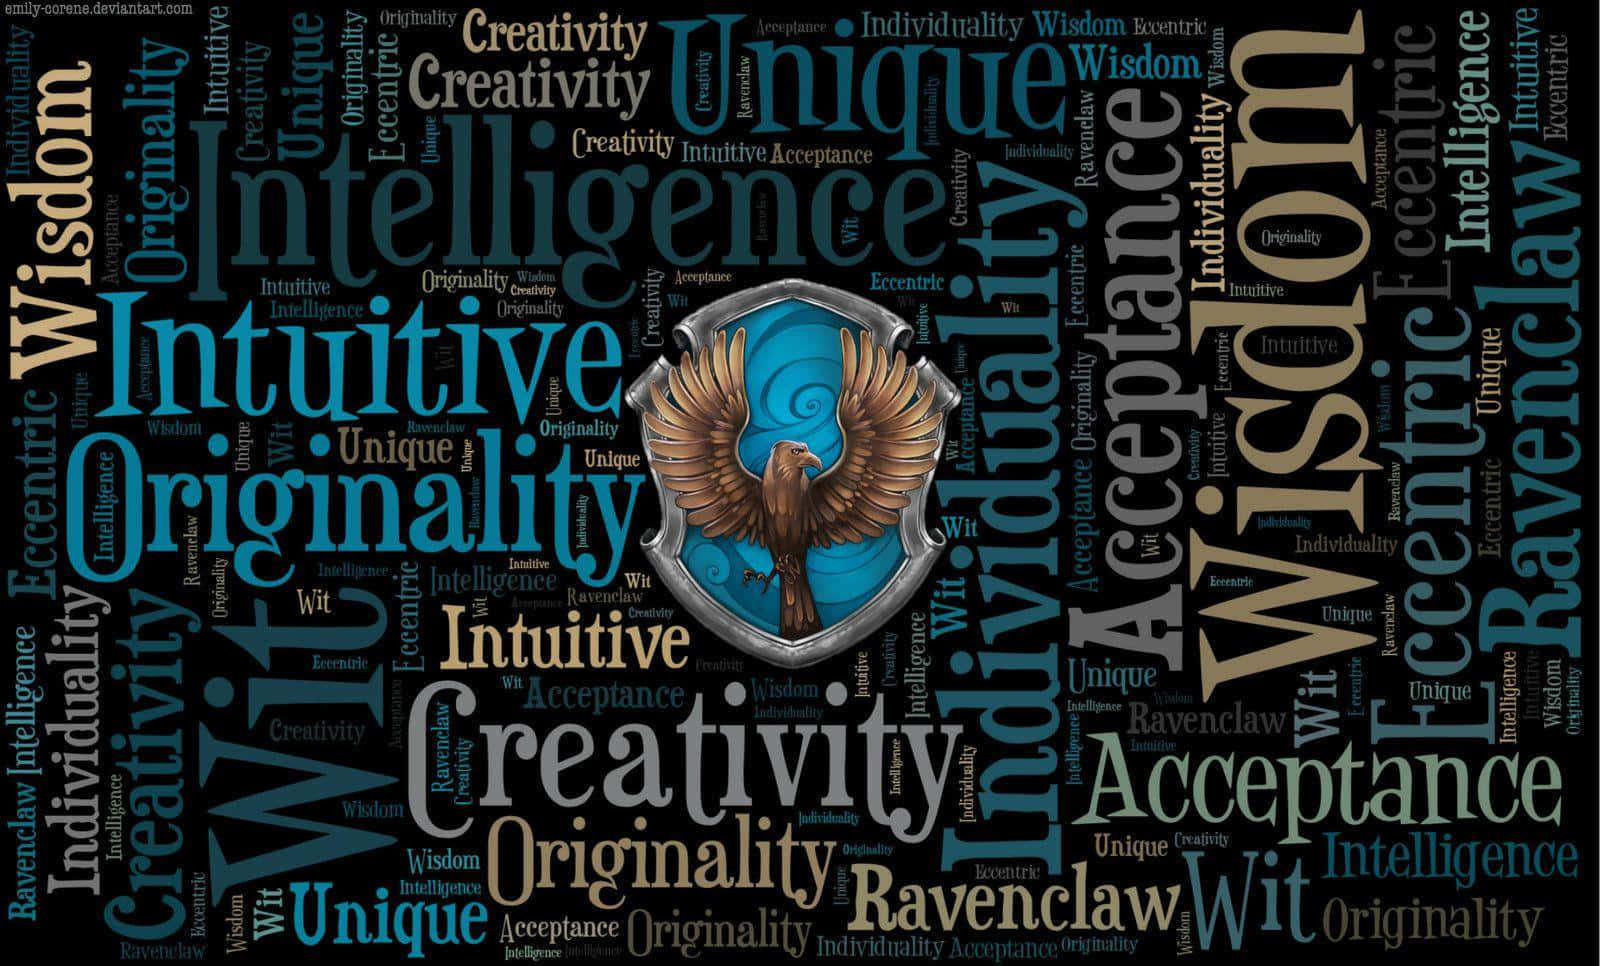 "The Carved Badge of the Ravenclaw House at Hogwarts" Wallpaper